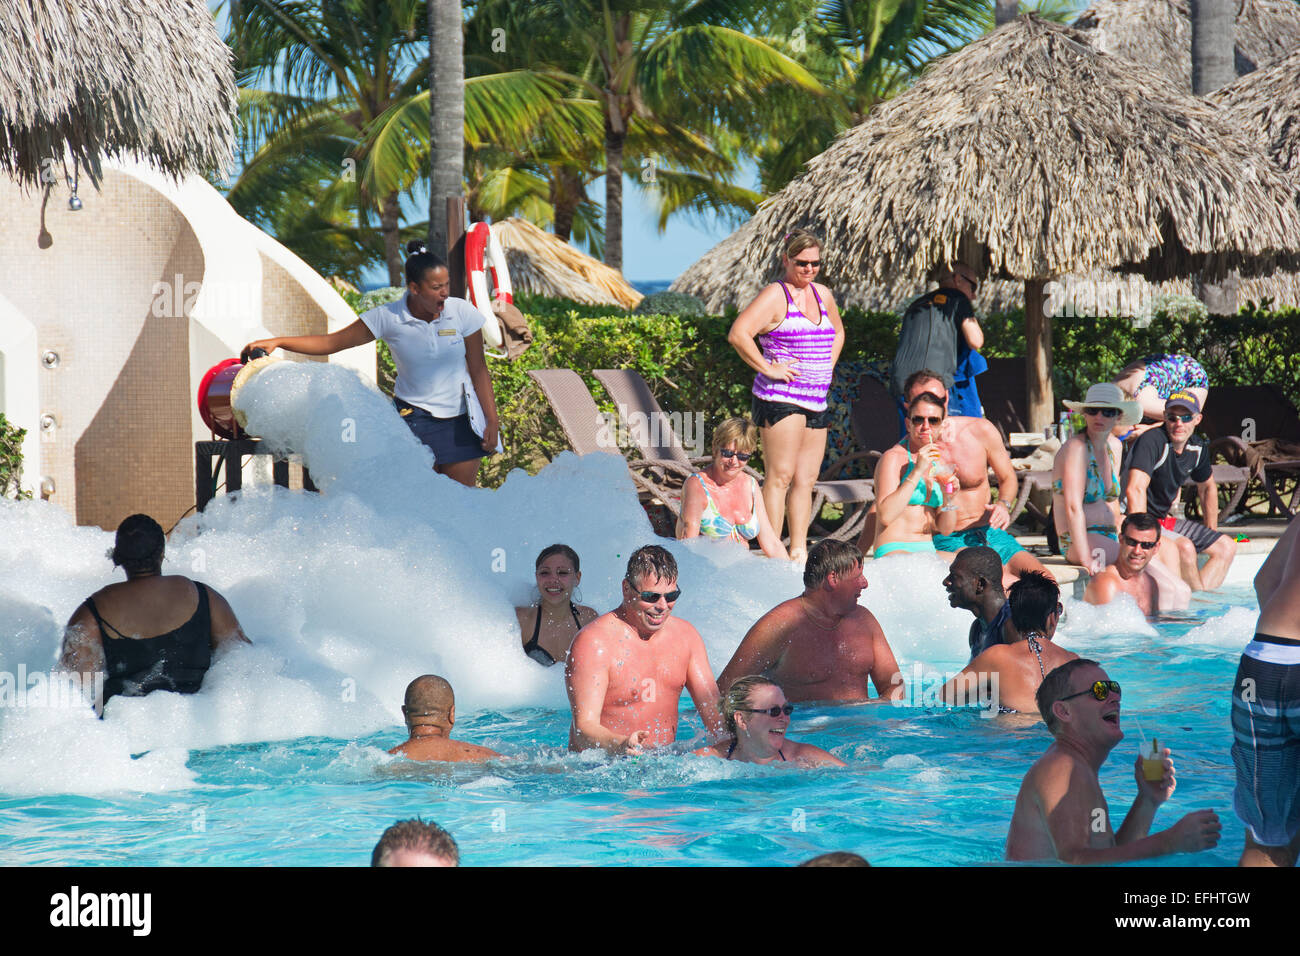 PUNTA CANA, DOMINICAN REPUBLIC. Holidaymakers at a swimming pool foam party. 2015. Stock Photo